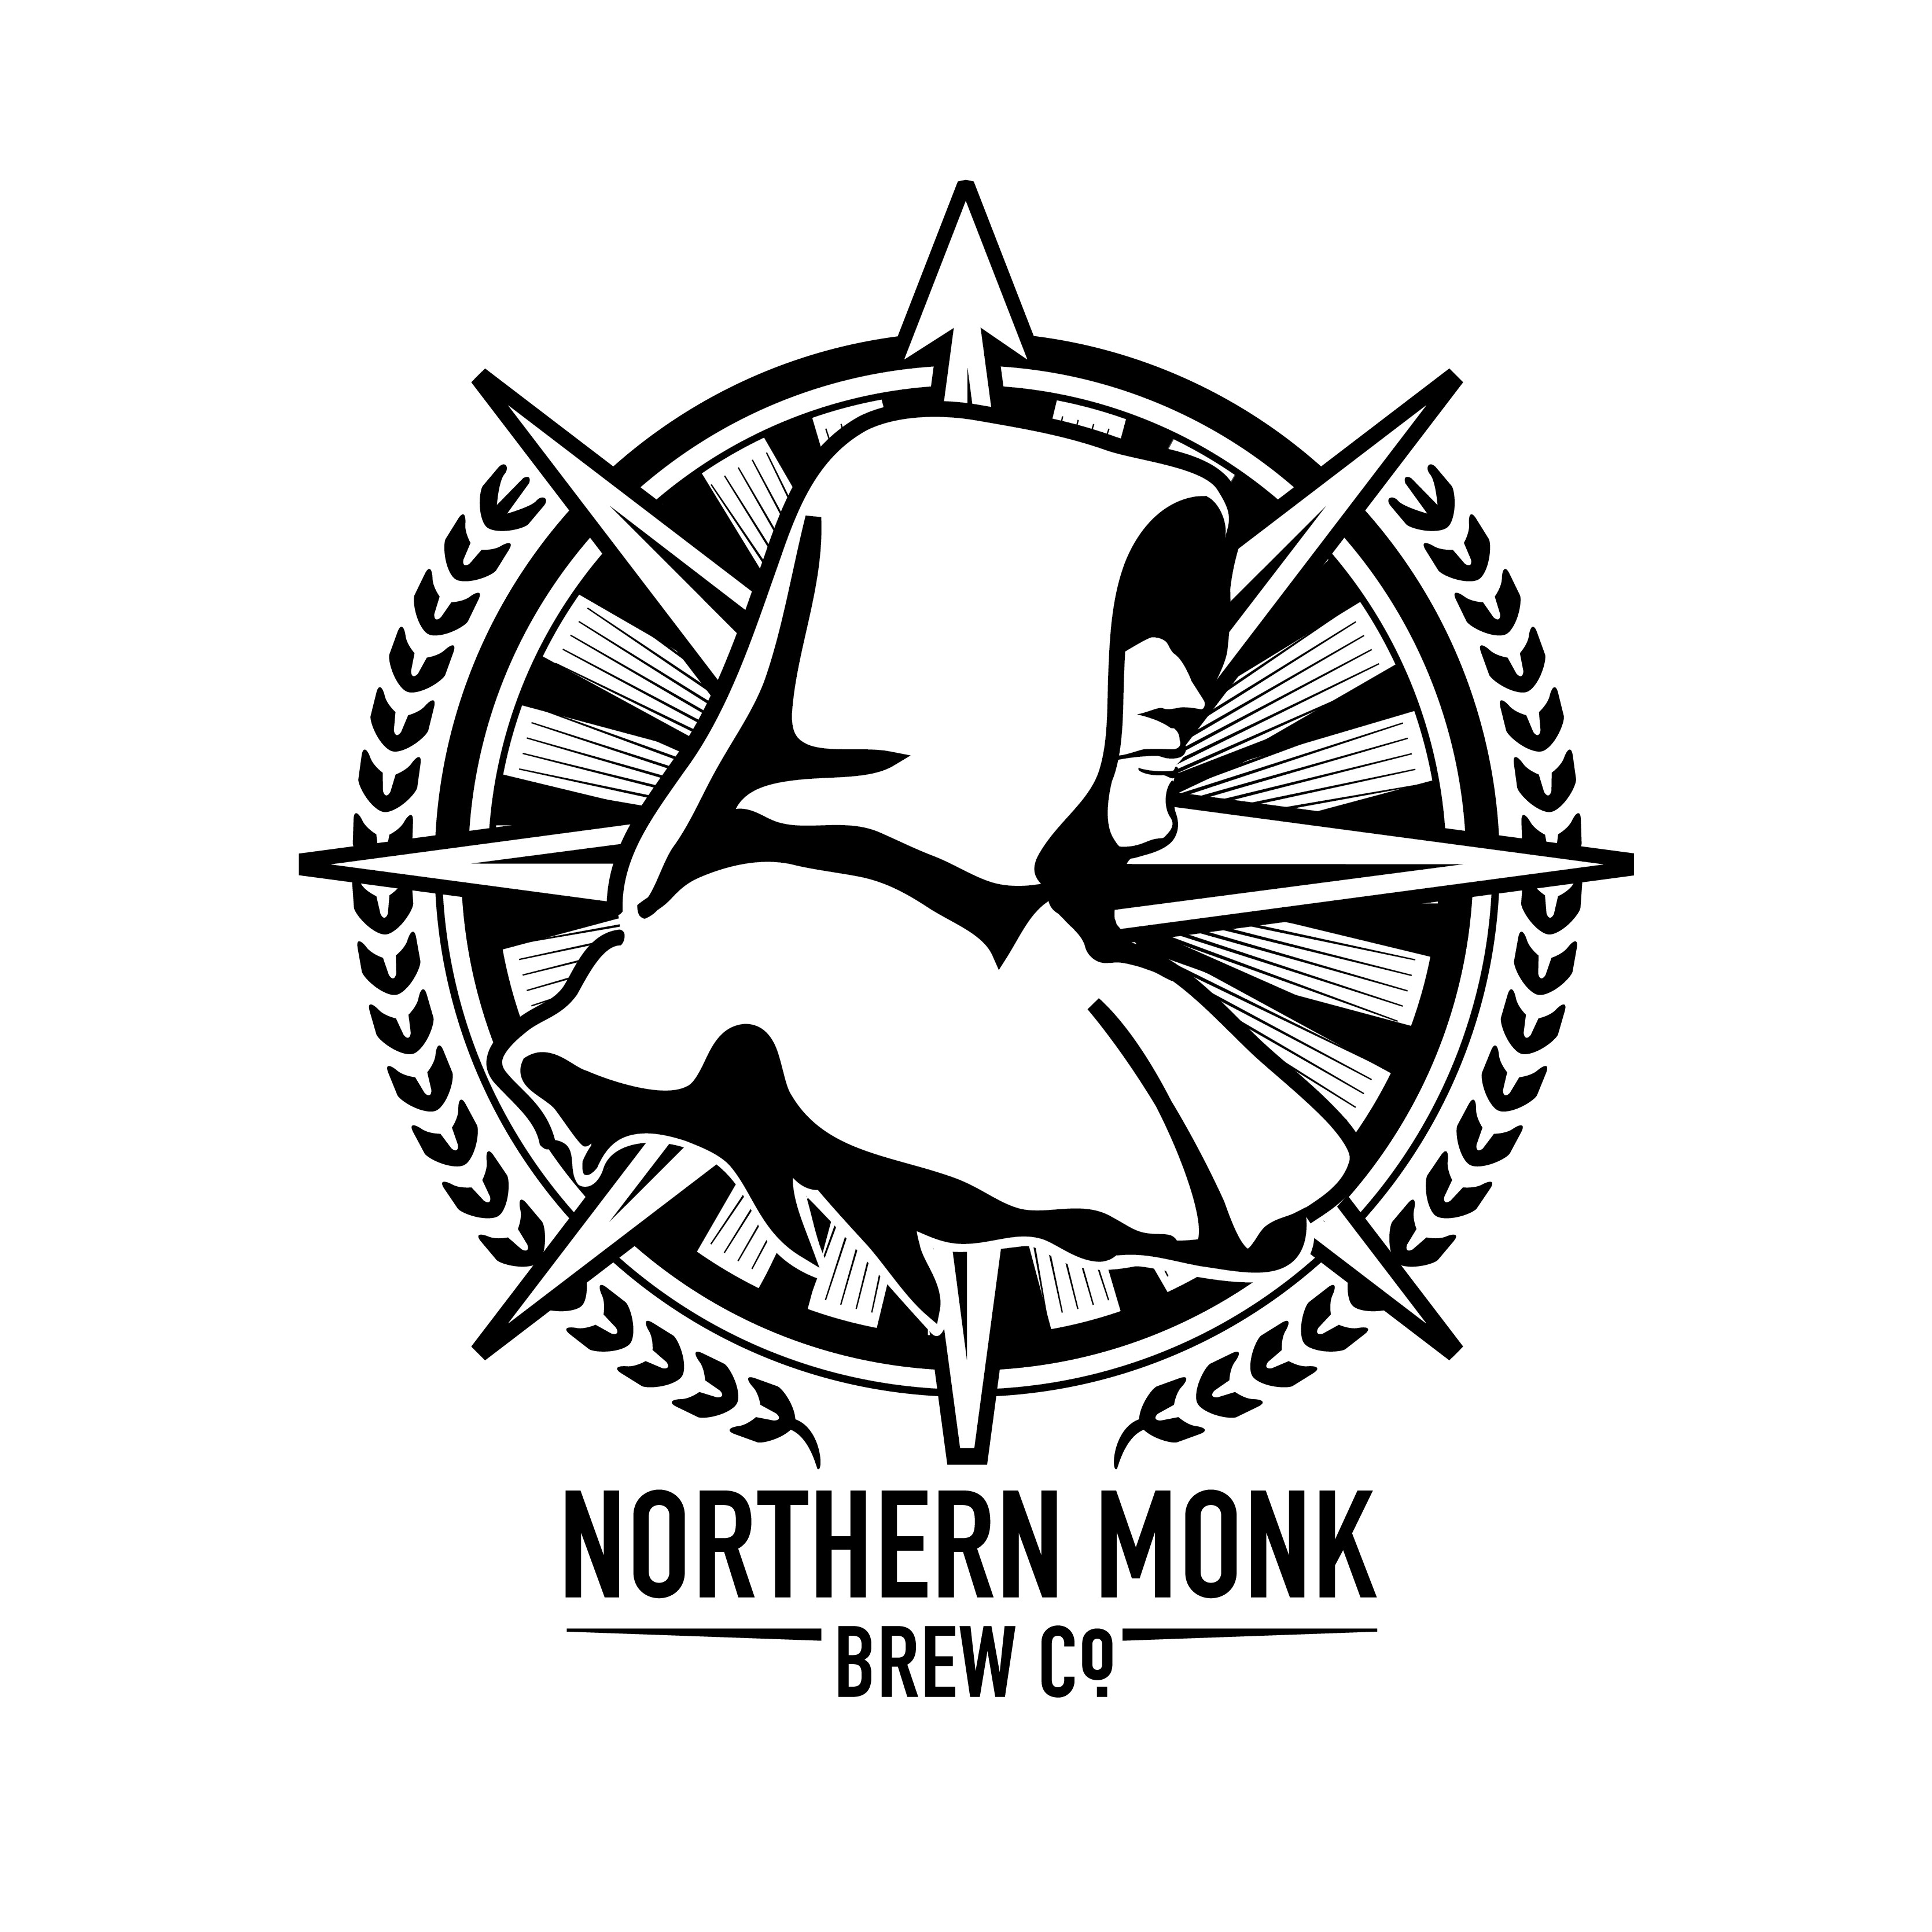 Northern Monk Brew Co